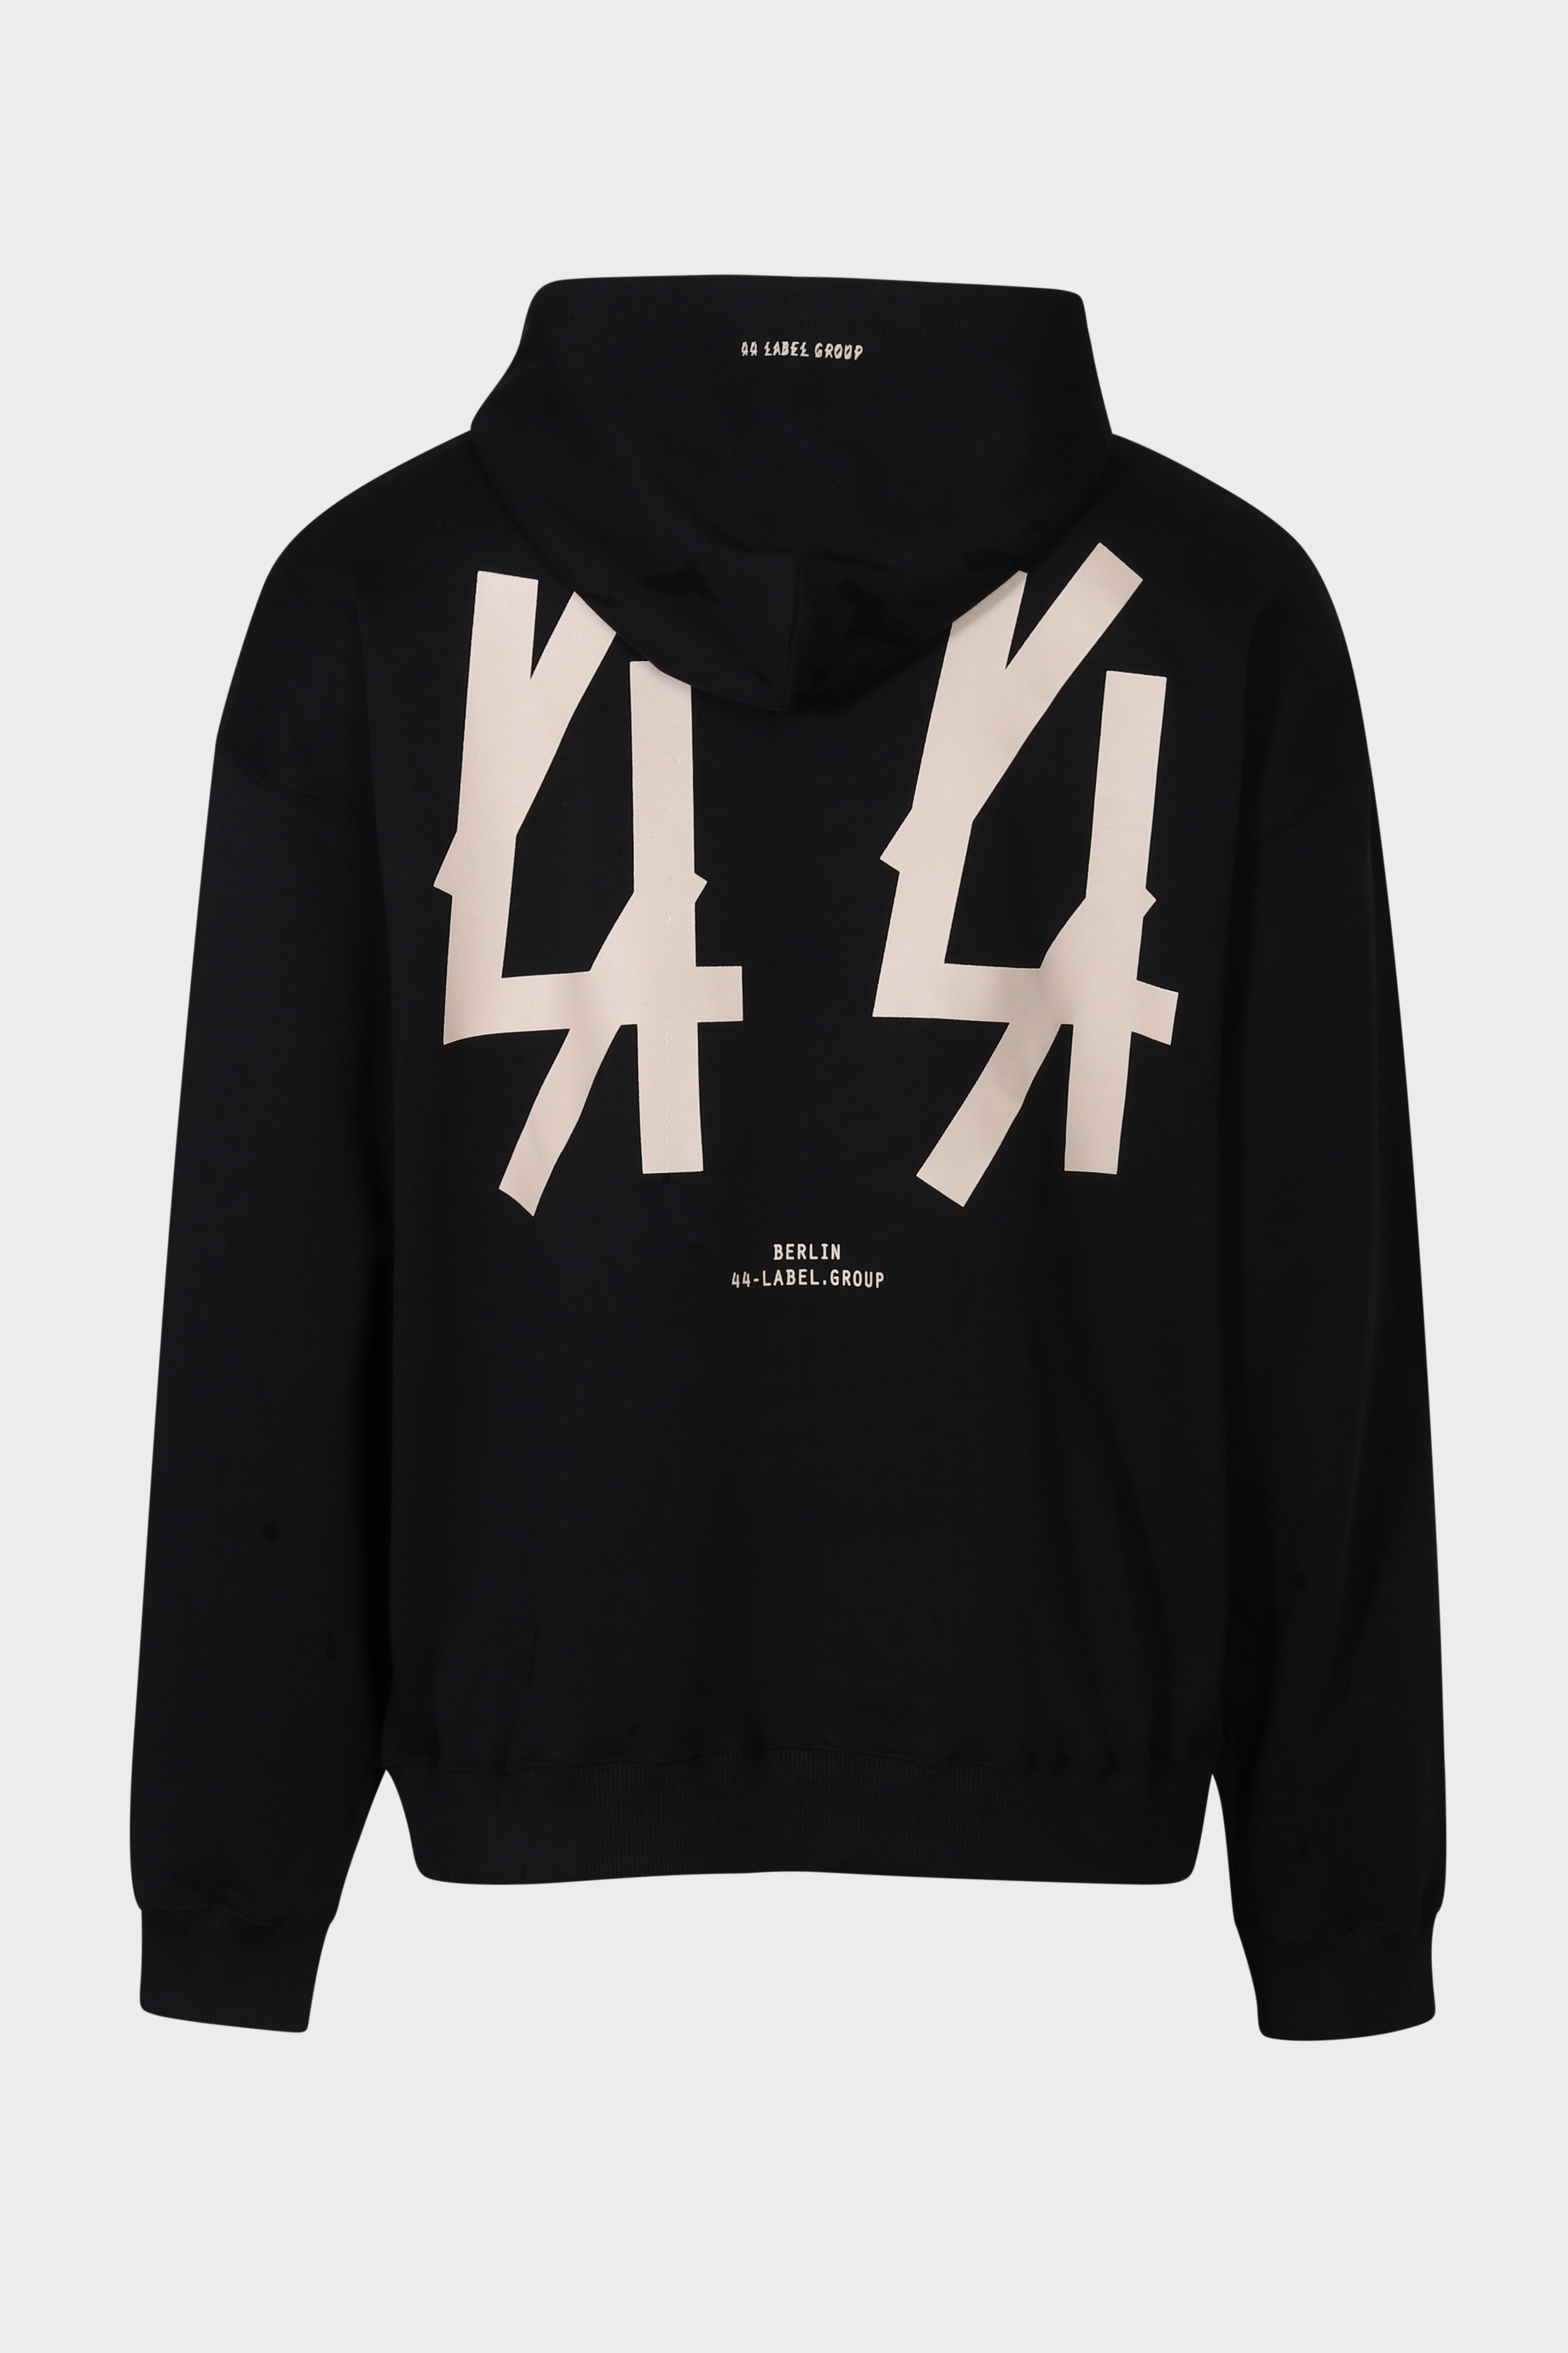 44 LABEL GROUP New Classic Hoodie in Black/Dirty White